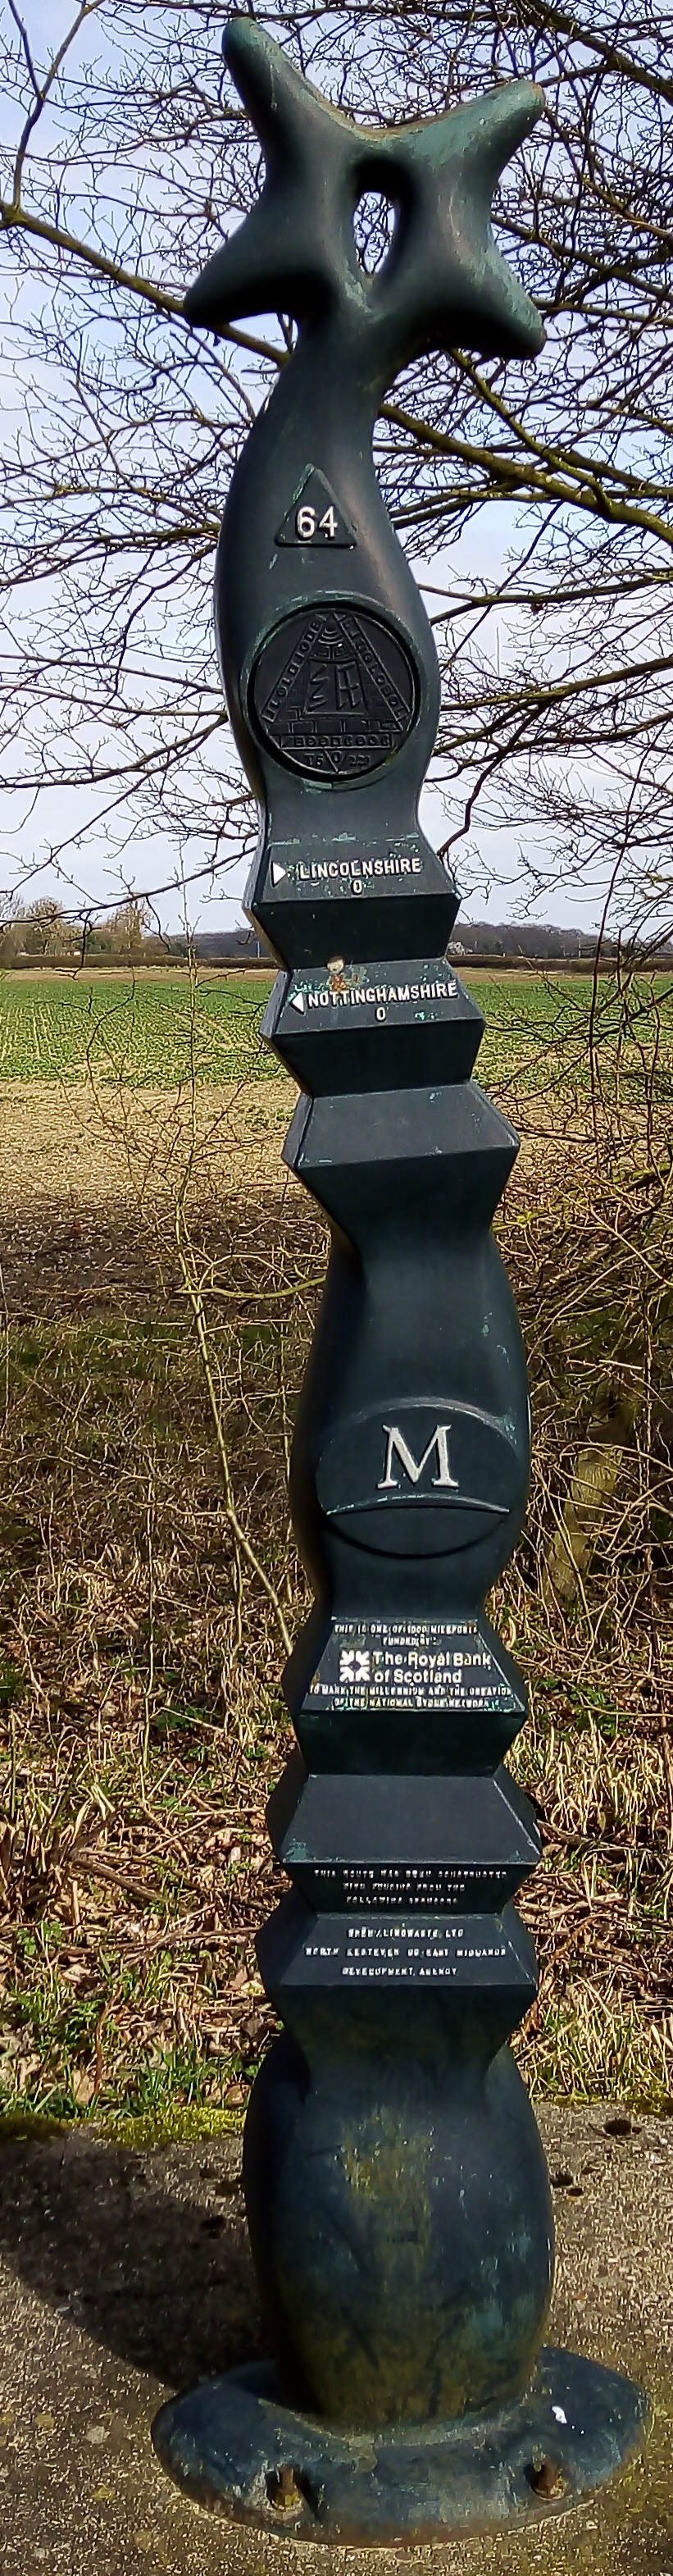 National Cycle route marker